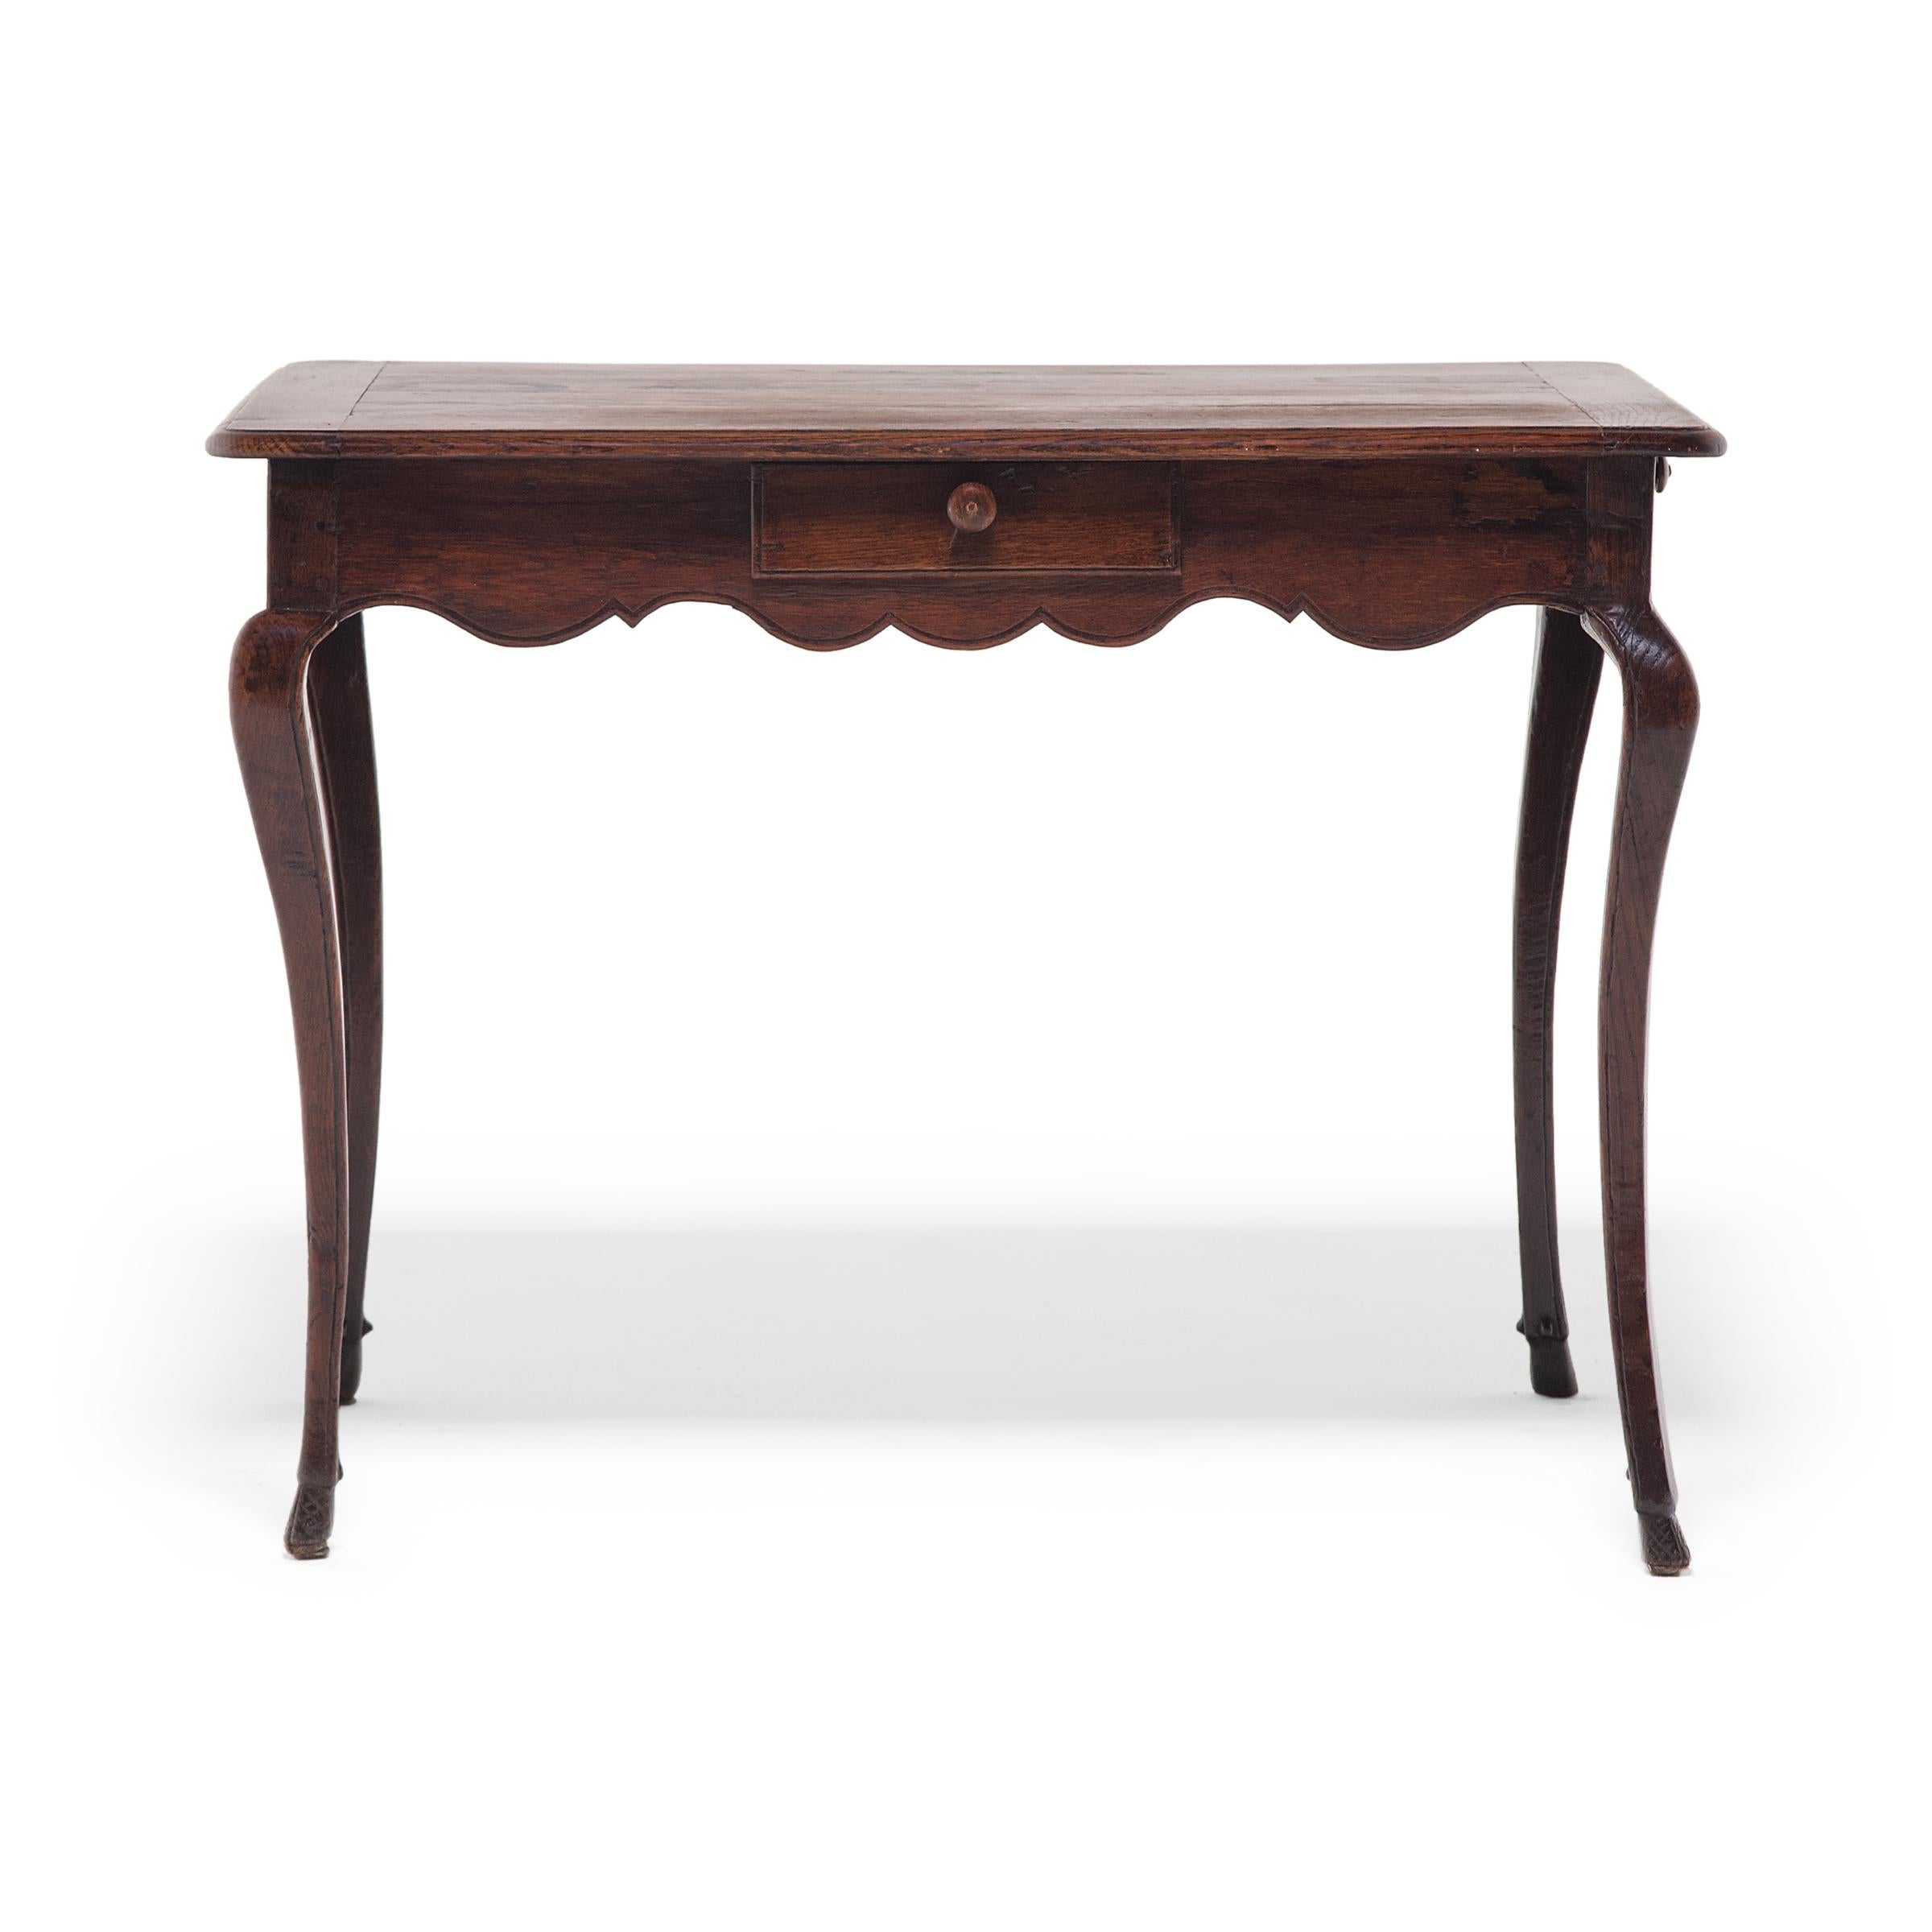 This elegant tea table was crafted of in late-19th-century France in the Louis XV-style, defined by its scalloped apron and thin cabriole legs. The s-form legs curve outwards from the top with dramatic flare, then taper gently to narrow hoof feet